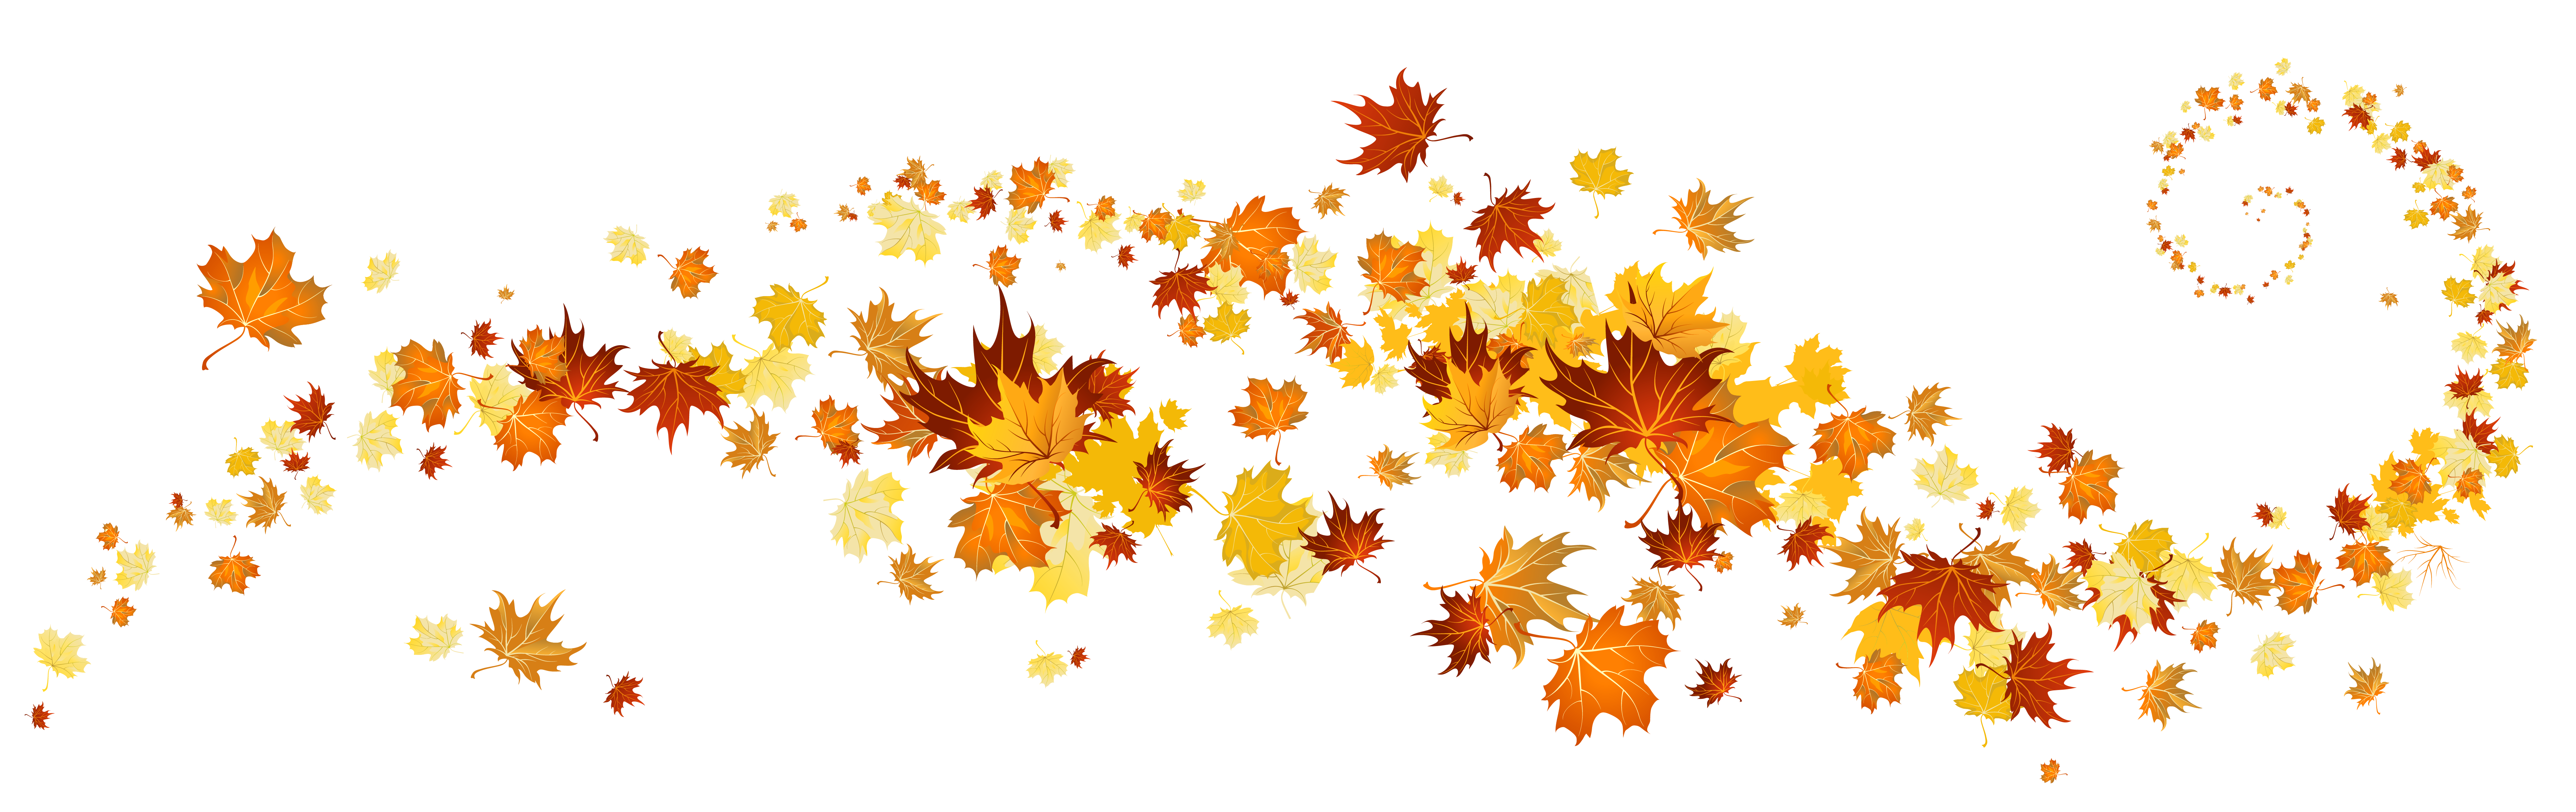 On autumn leaves clipart clipground jpg